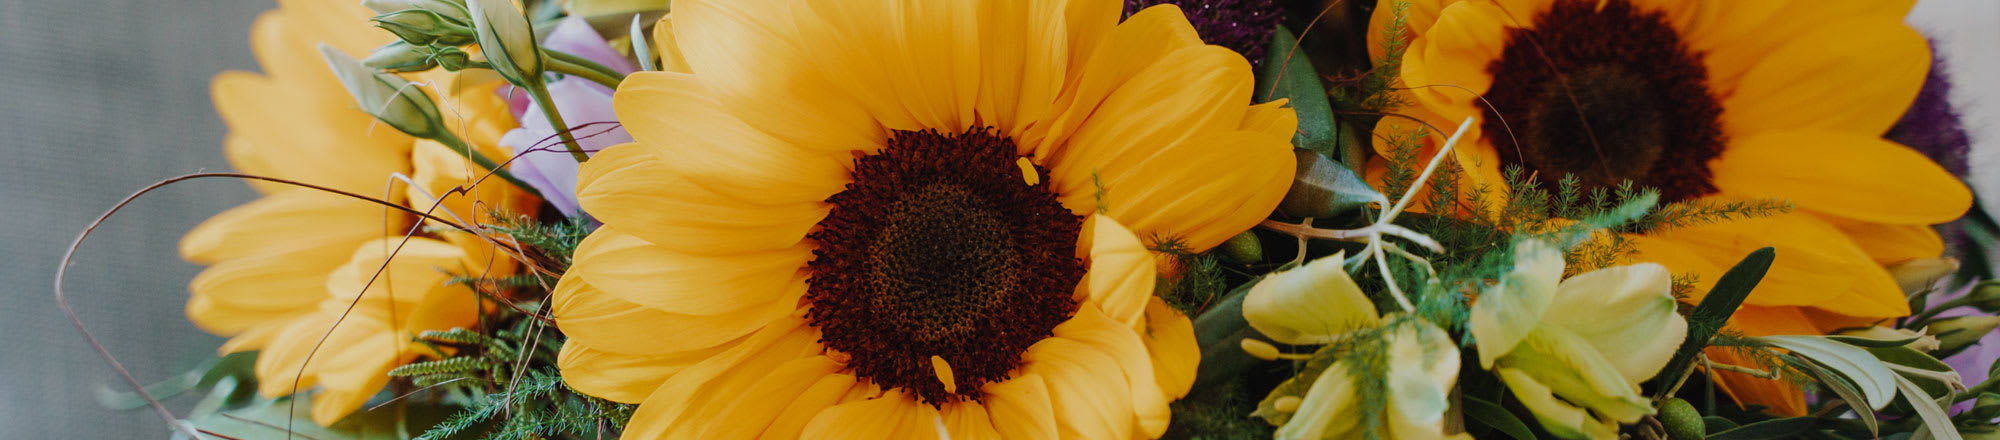 Sunflowers with detoxifying properties